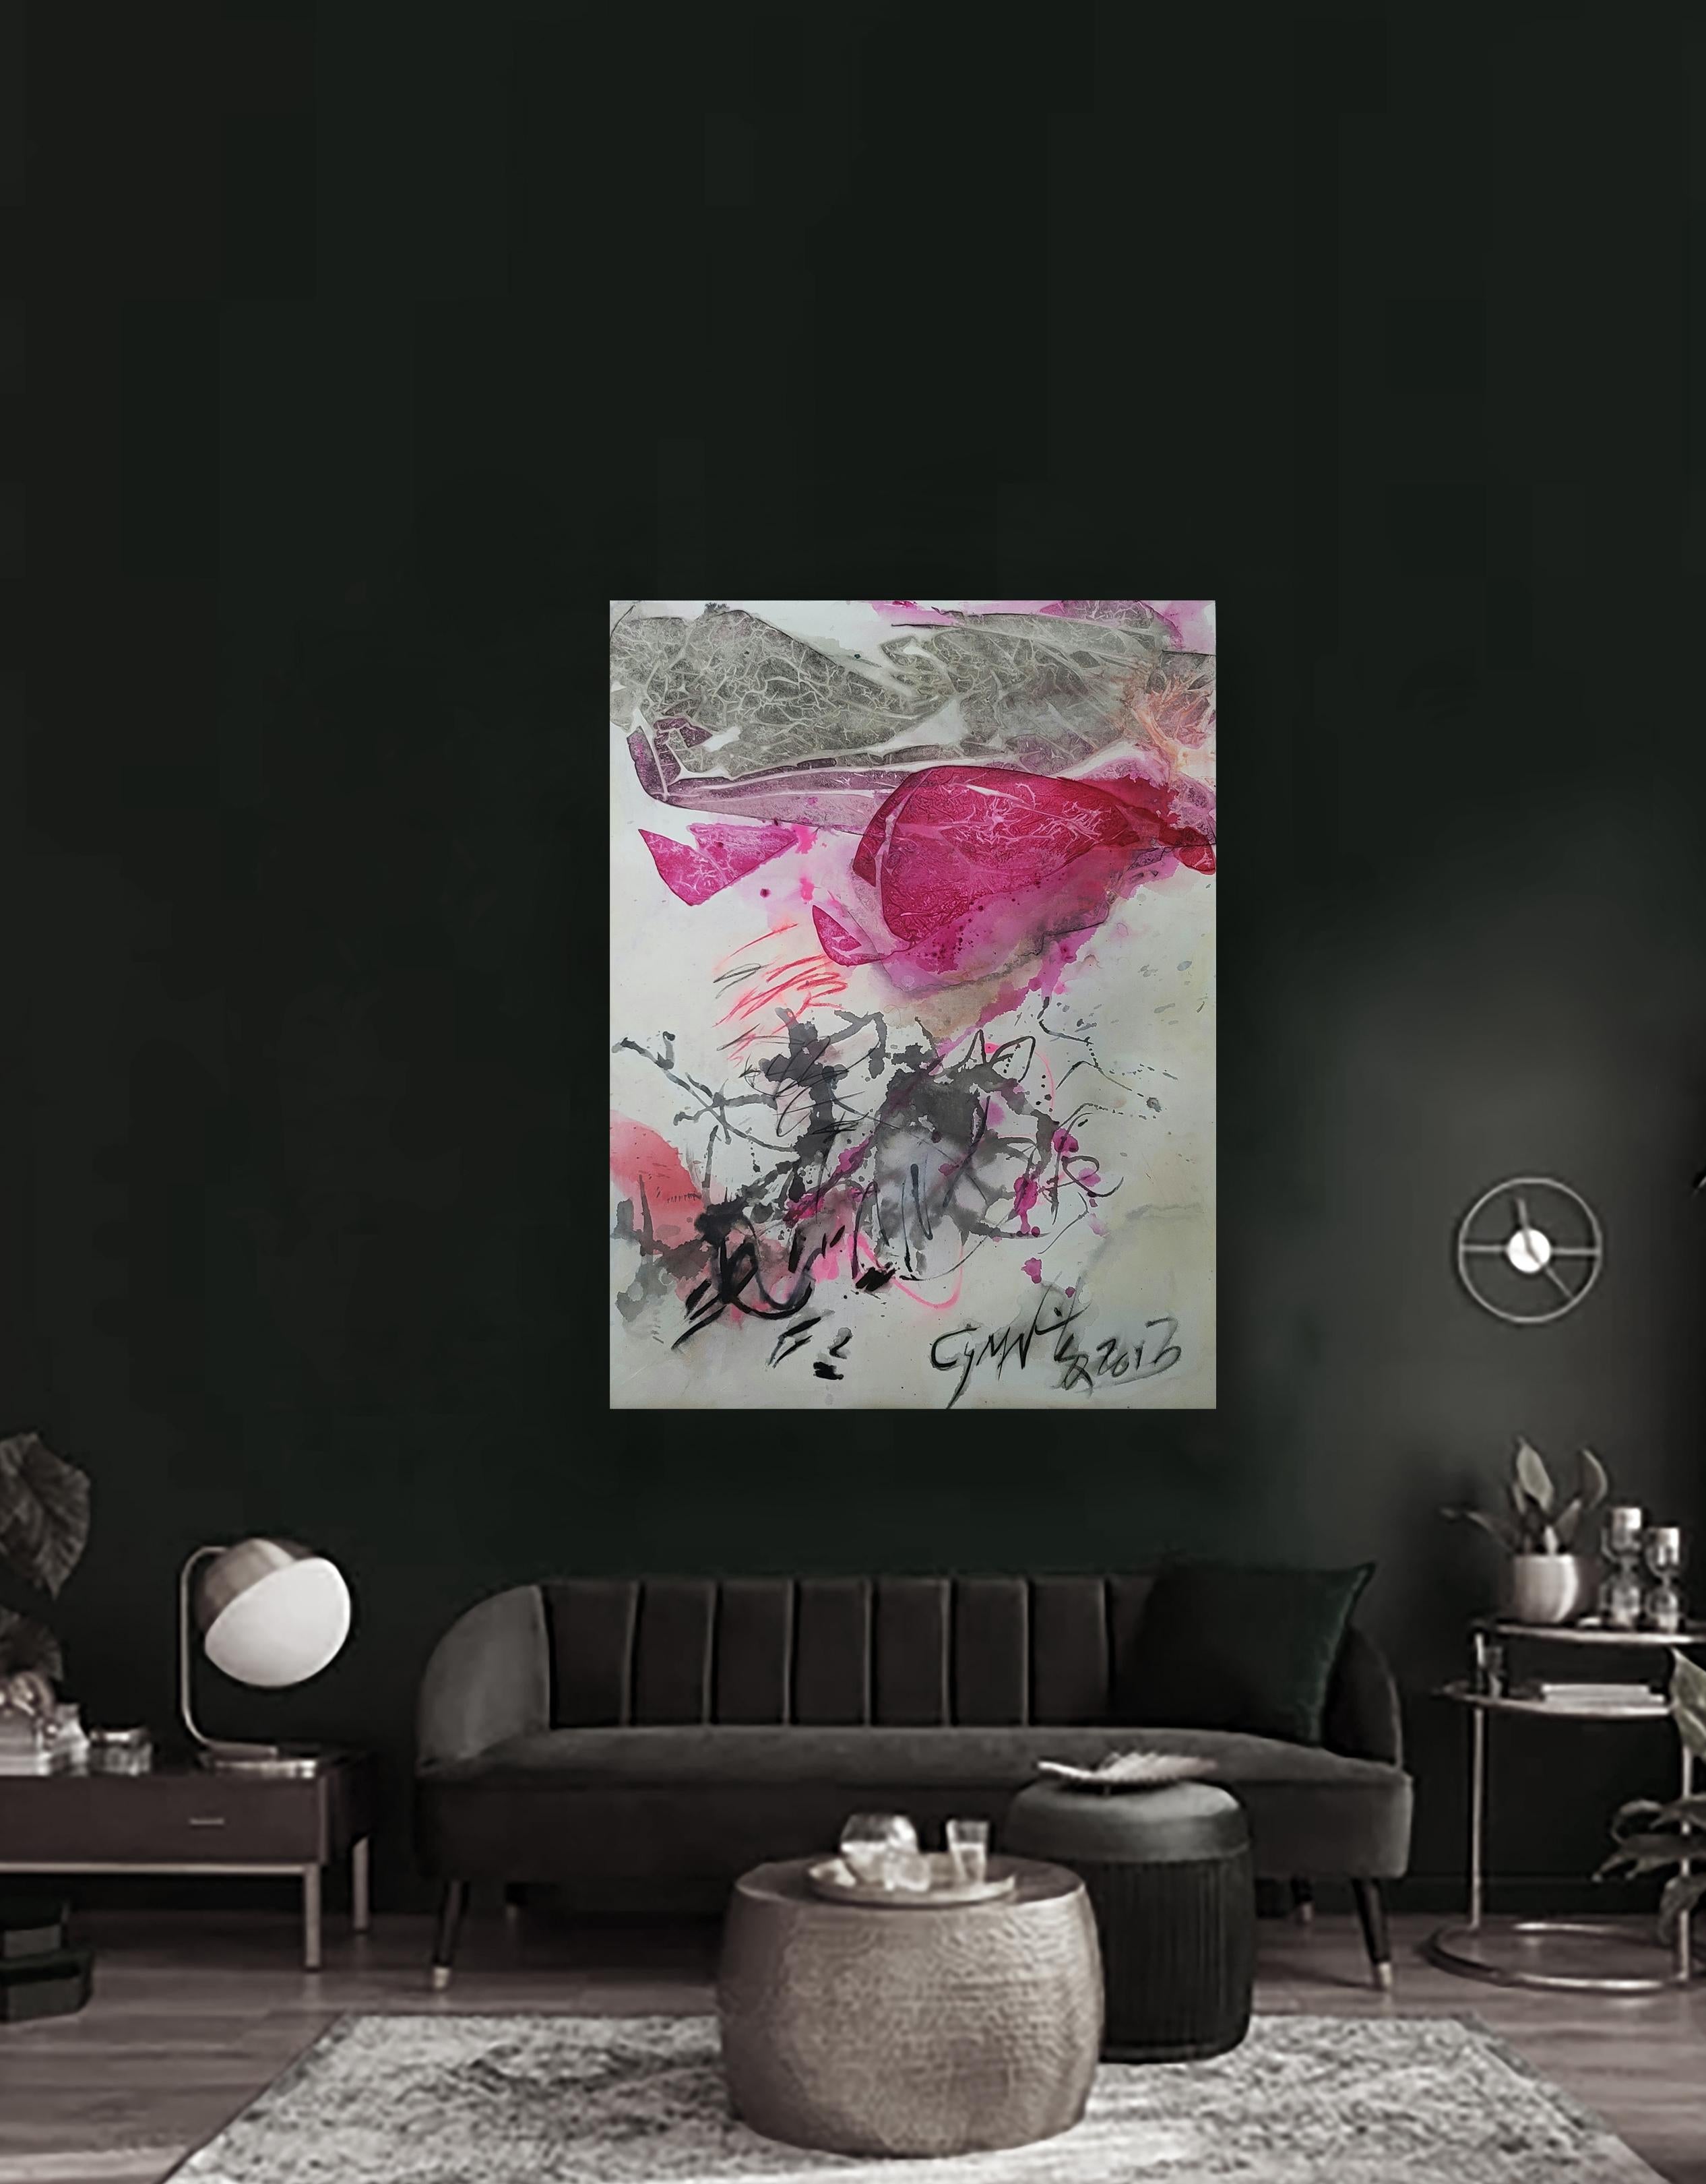 Solo Growth -Vivid, Colorful, Expressive Abstract, Zen Calligraphy - Abstract Expressionist Painting by Cymn Wong 